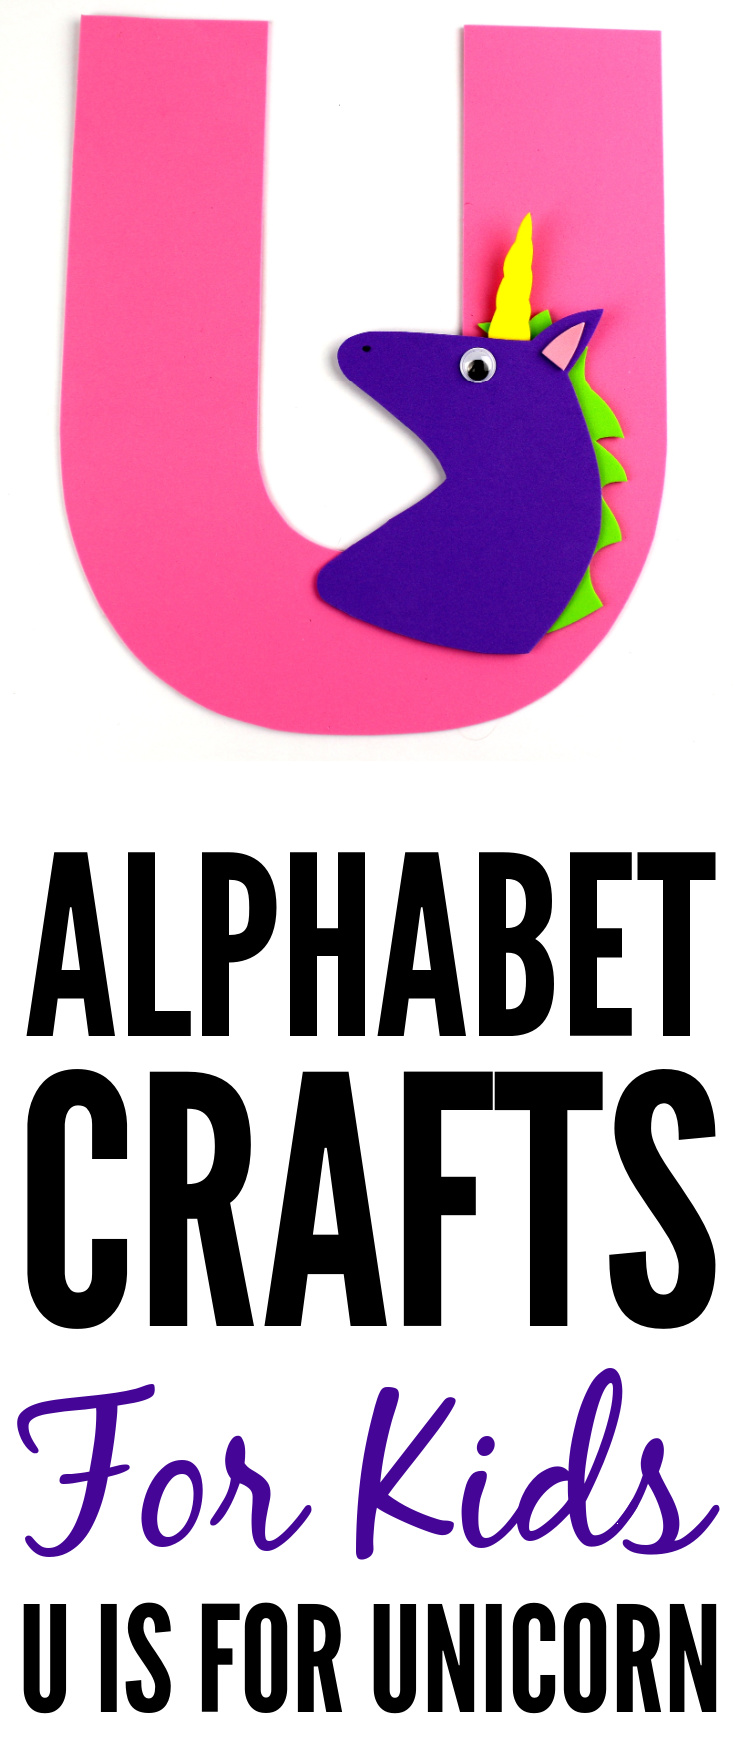 This week in my series of ABCs kids crafts featuring the Alphabet, we are doing a U is for Unicorn craft. These Alphabet Crafts For Kids are a fun way to introduce your child to the alphabet.